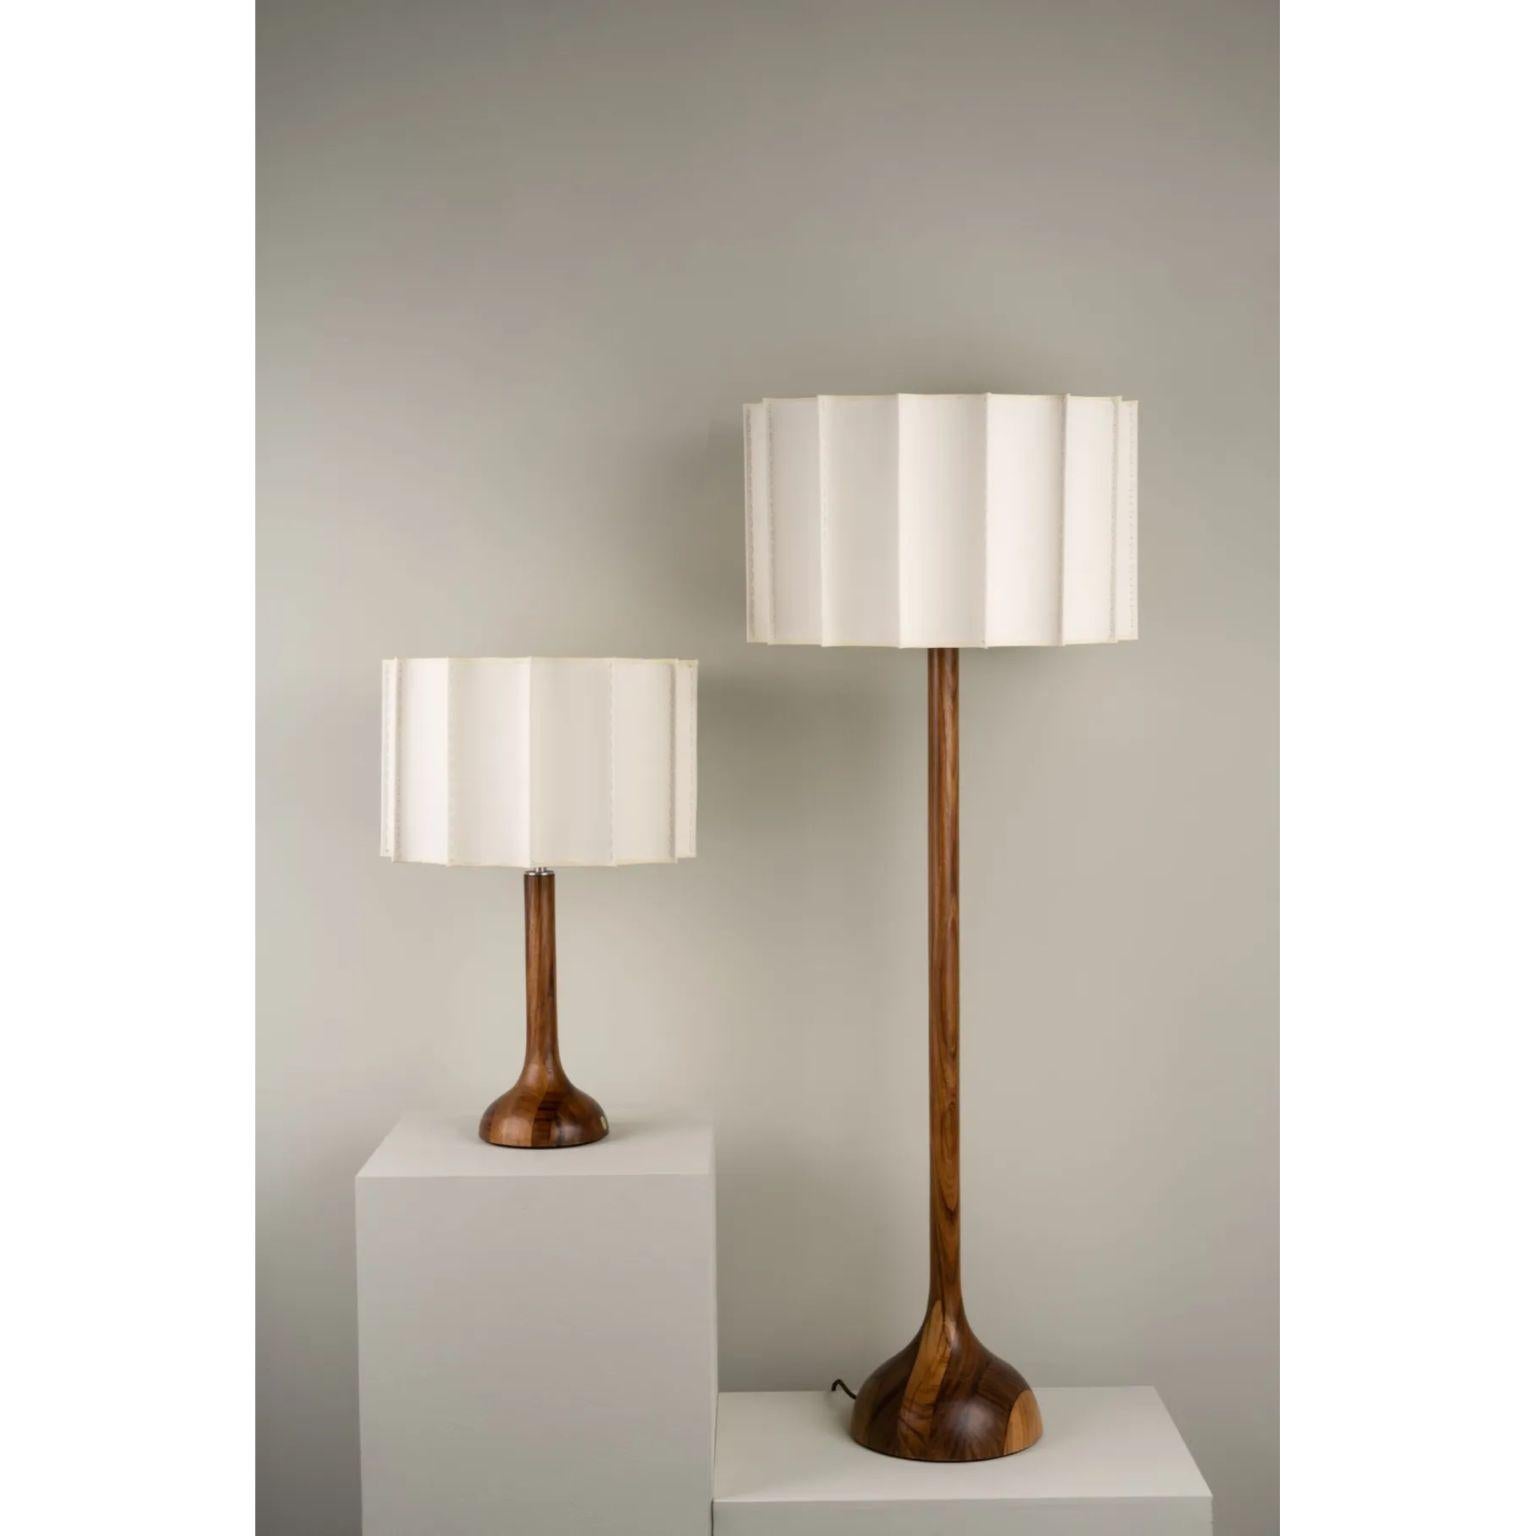 Set of 2 Pata De Elefante Lamps by Isabel Moncada
Dimensions: Floor Lamp: Ø 55 x H 150 cm.
Small Table Lamp: Ø 40 x H 70 cm.
Materials: Turned parota wood base and fabric-lined lampshade with fiberglass and polystyrene.

Named Pata de Elefante